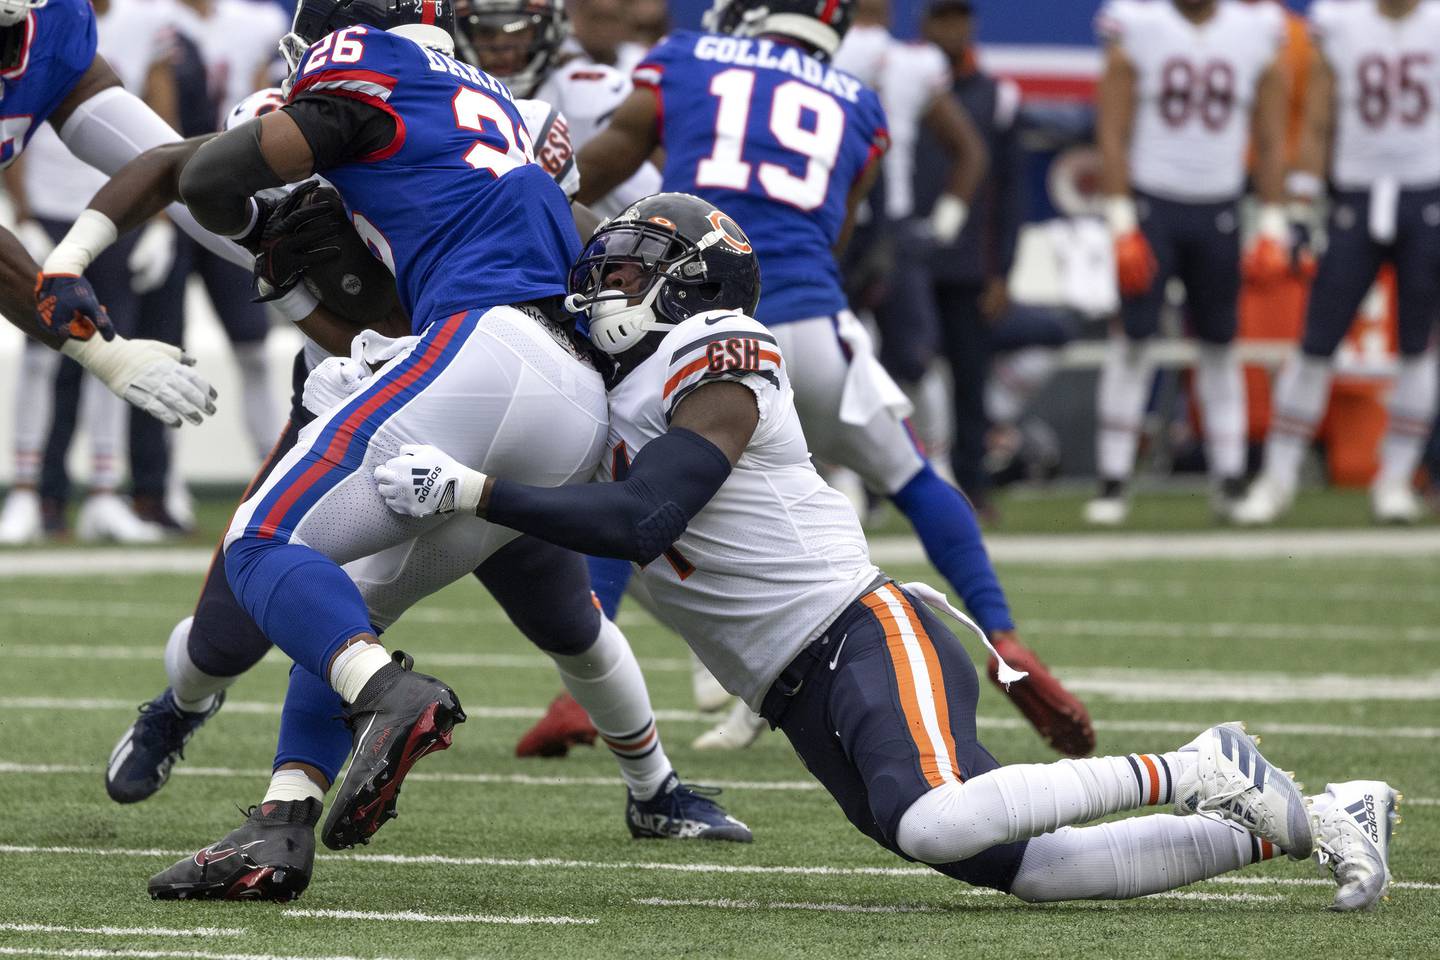 Bears safety Eddie Jackson takes down Giants running back Saquon Barkley during the first quarter on Oct. 12, 2022, at MetLife Stadium.